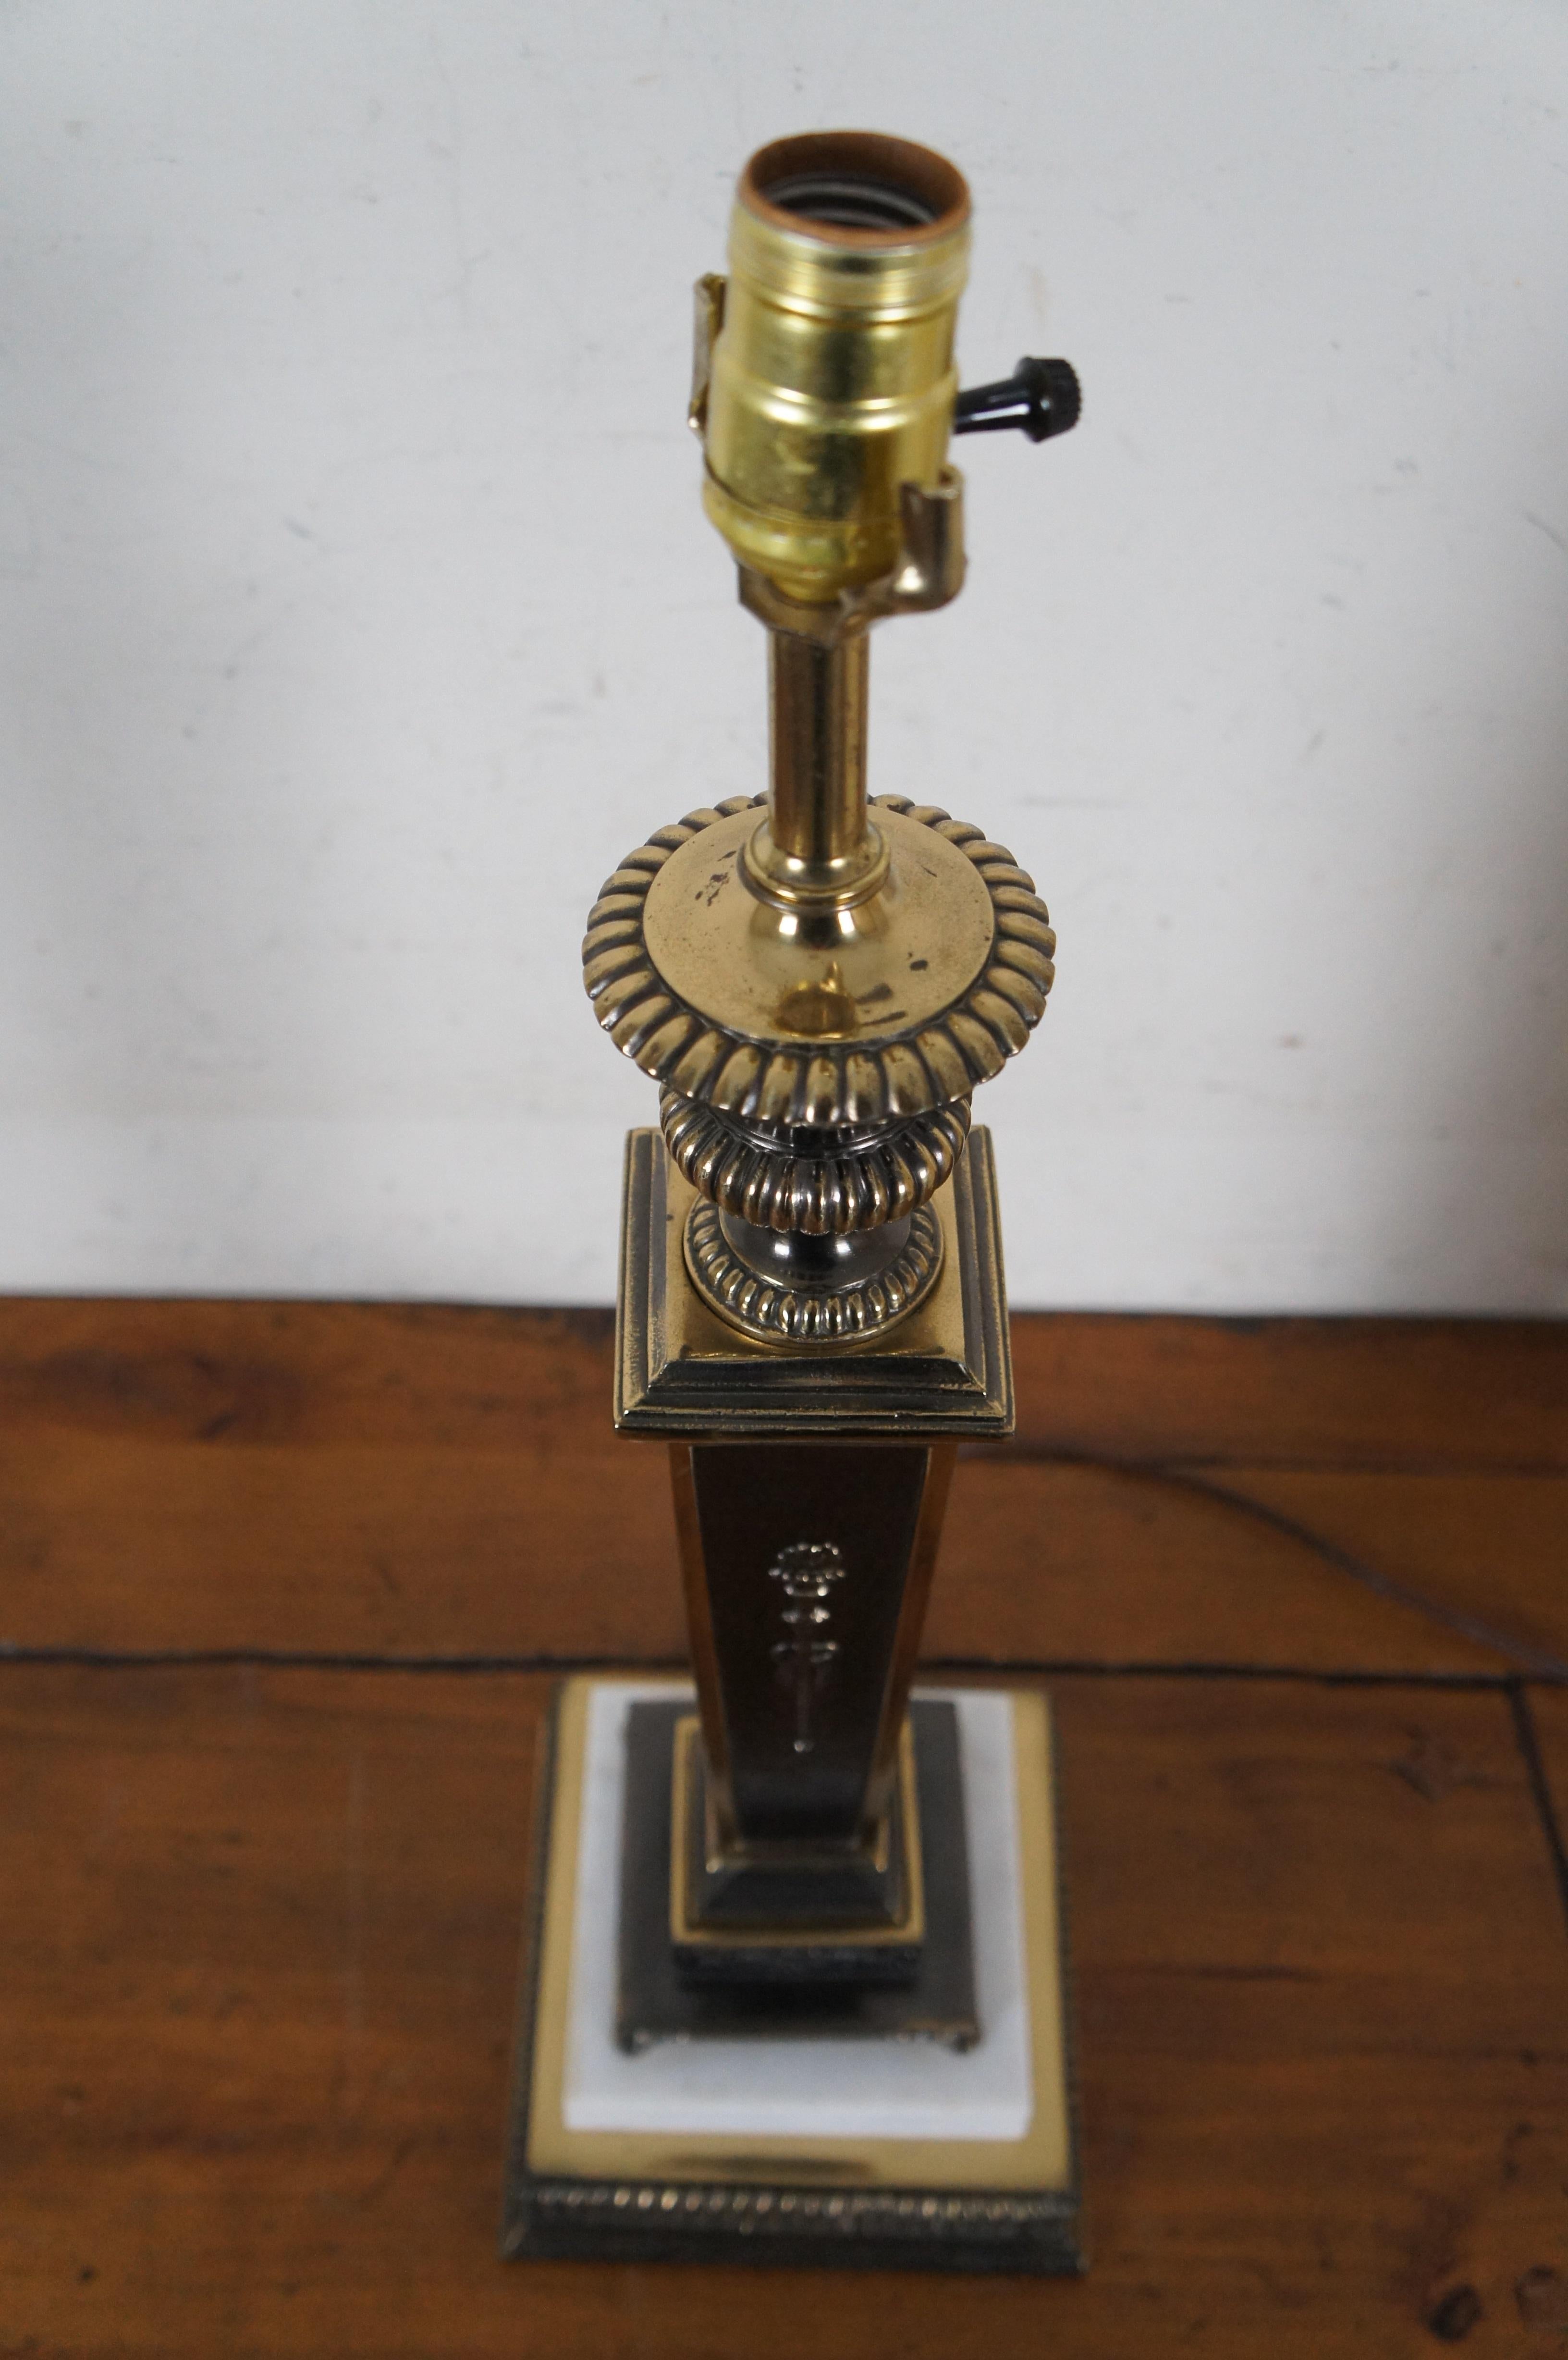 Vintage Brass & Marble Empire Torchiere Column Candlestick Table Lamp 37